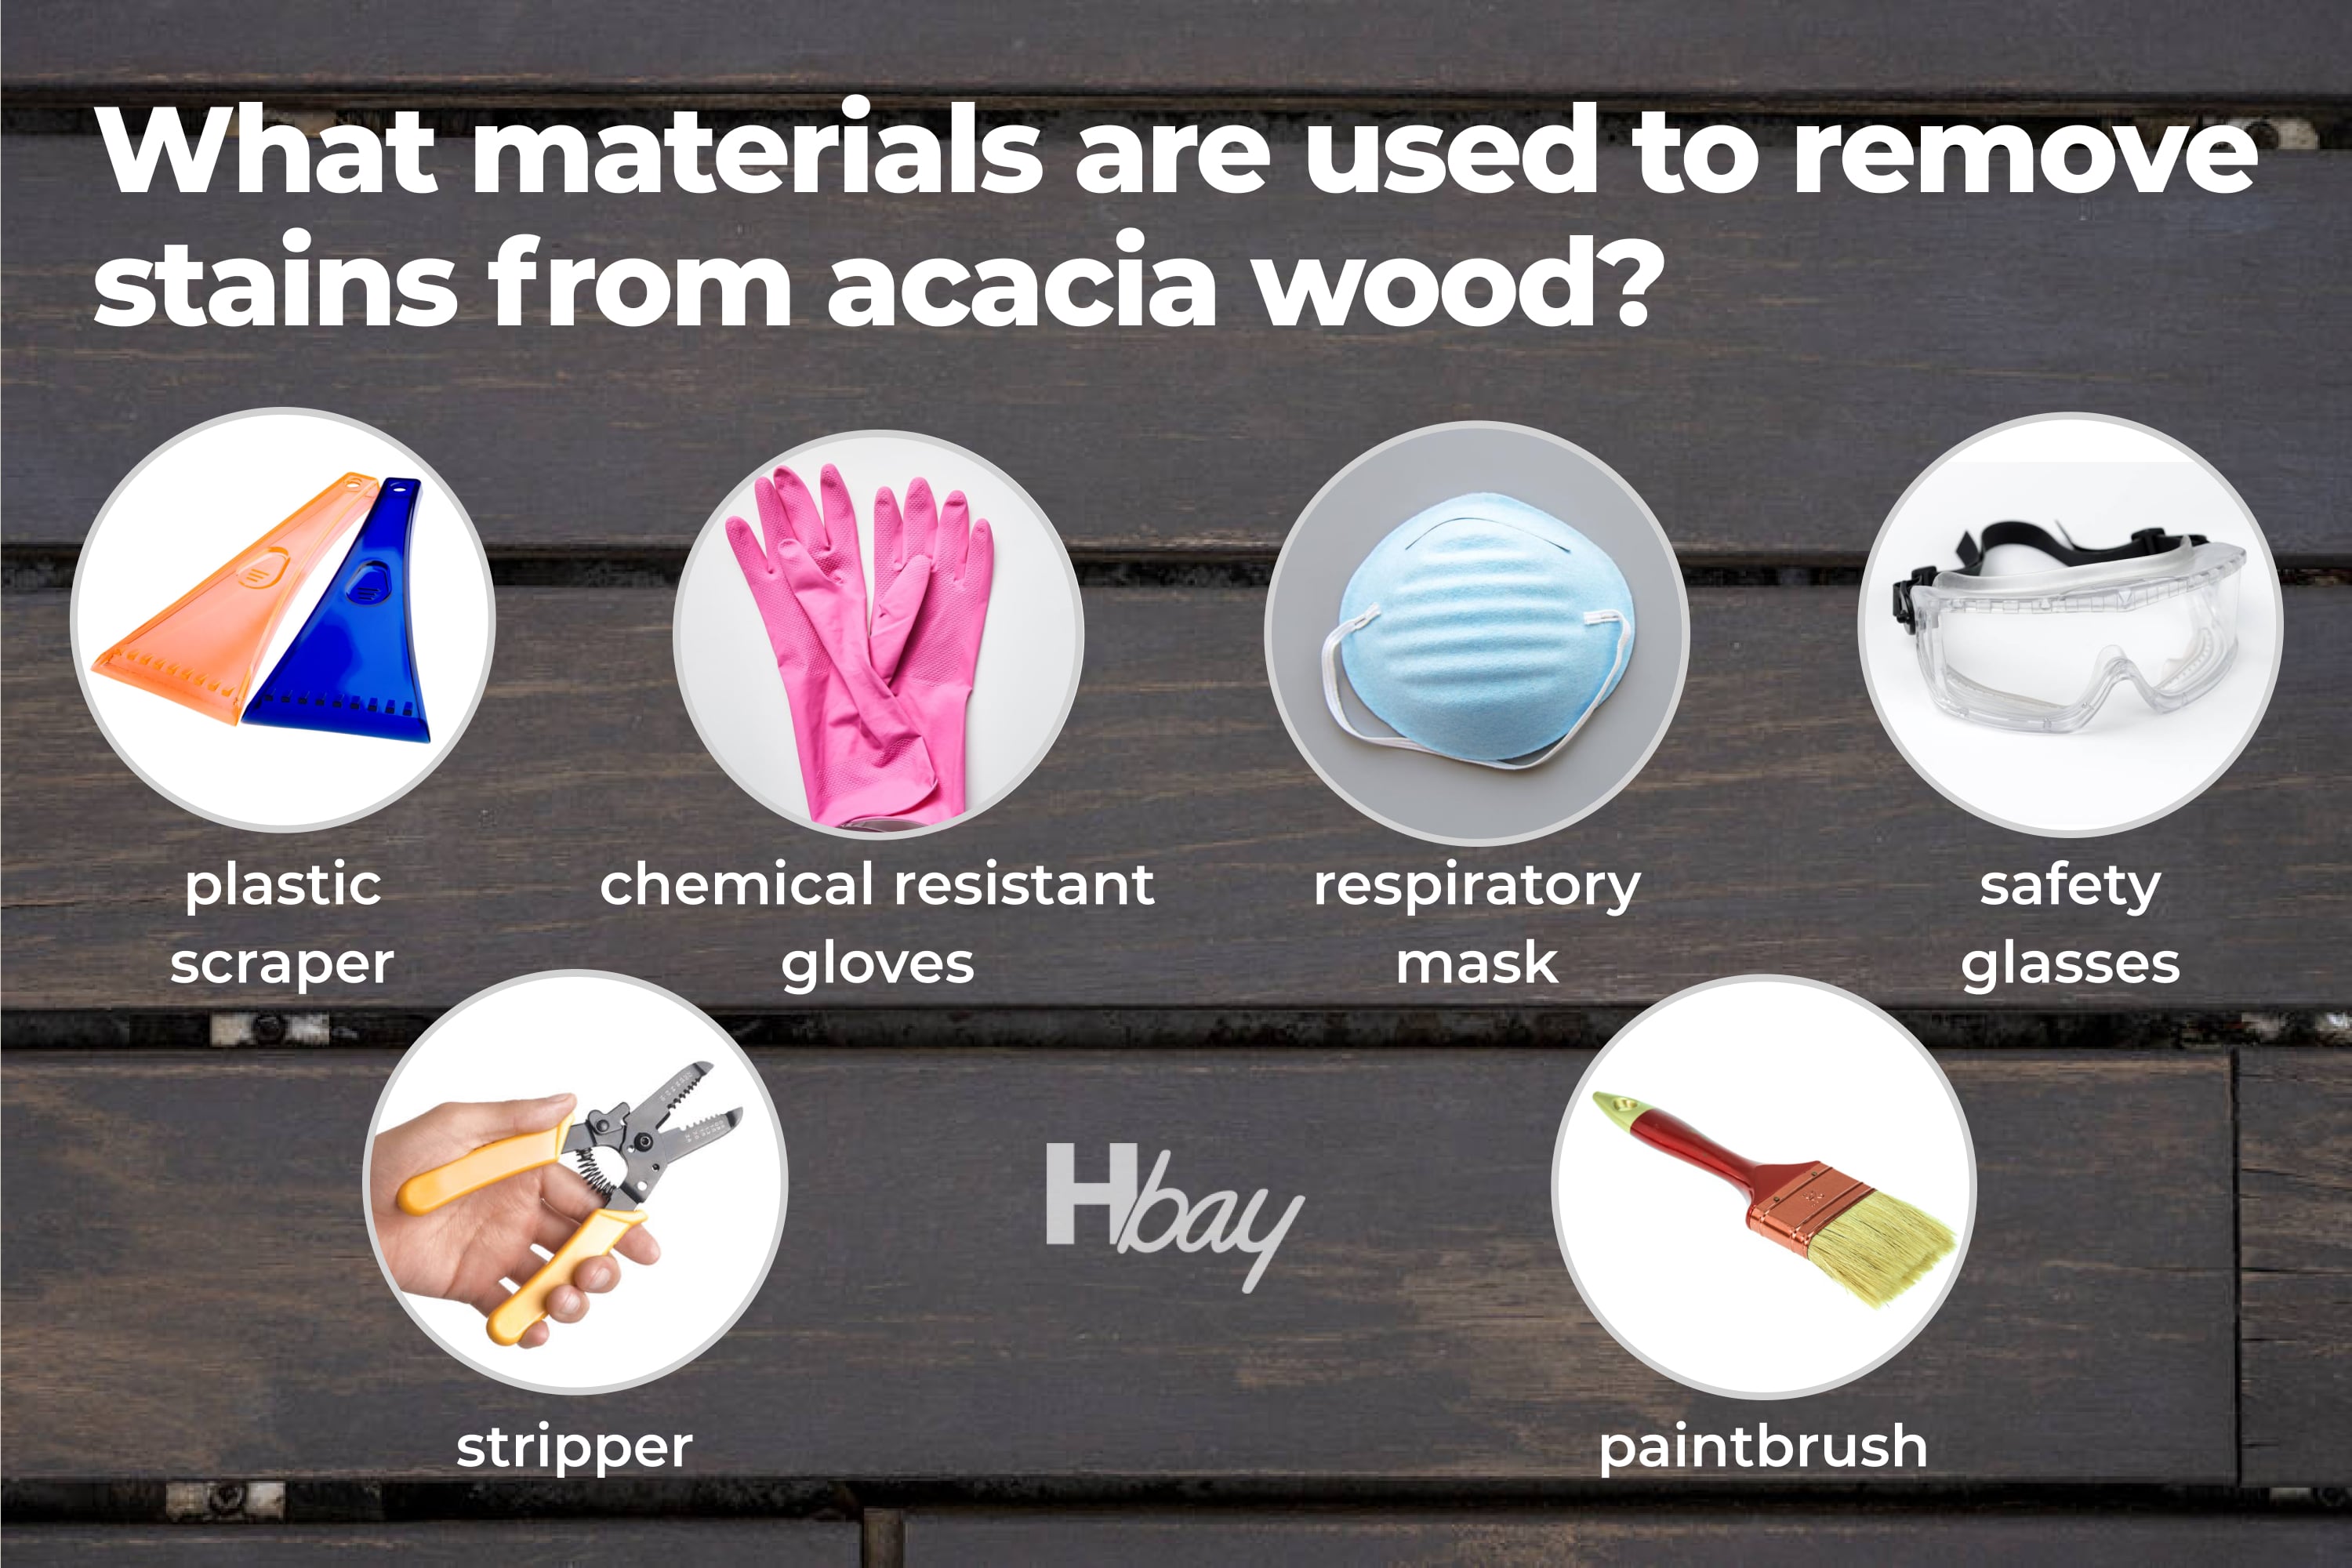 What materials are used to remove stains from acacia wood